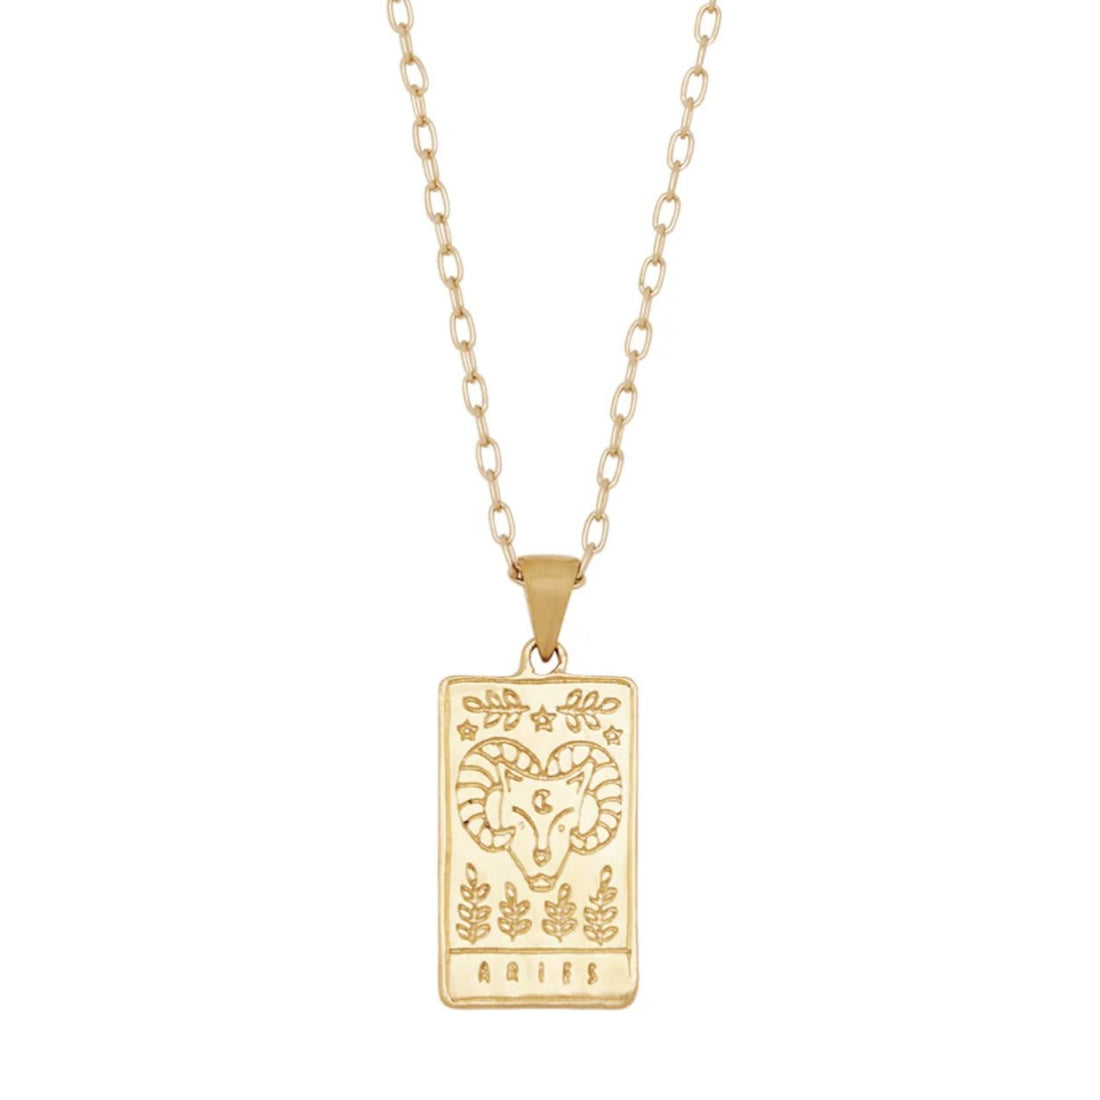 S - kin Studio, Aries Zodiac Necklace - The Flower Crate